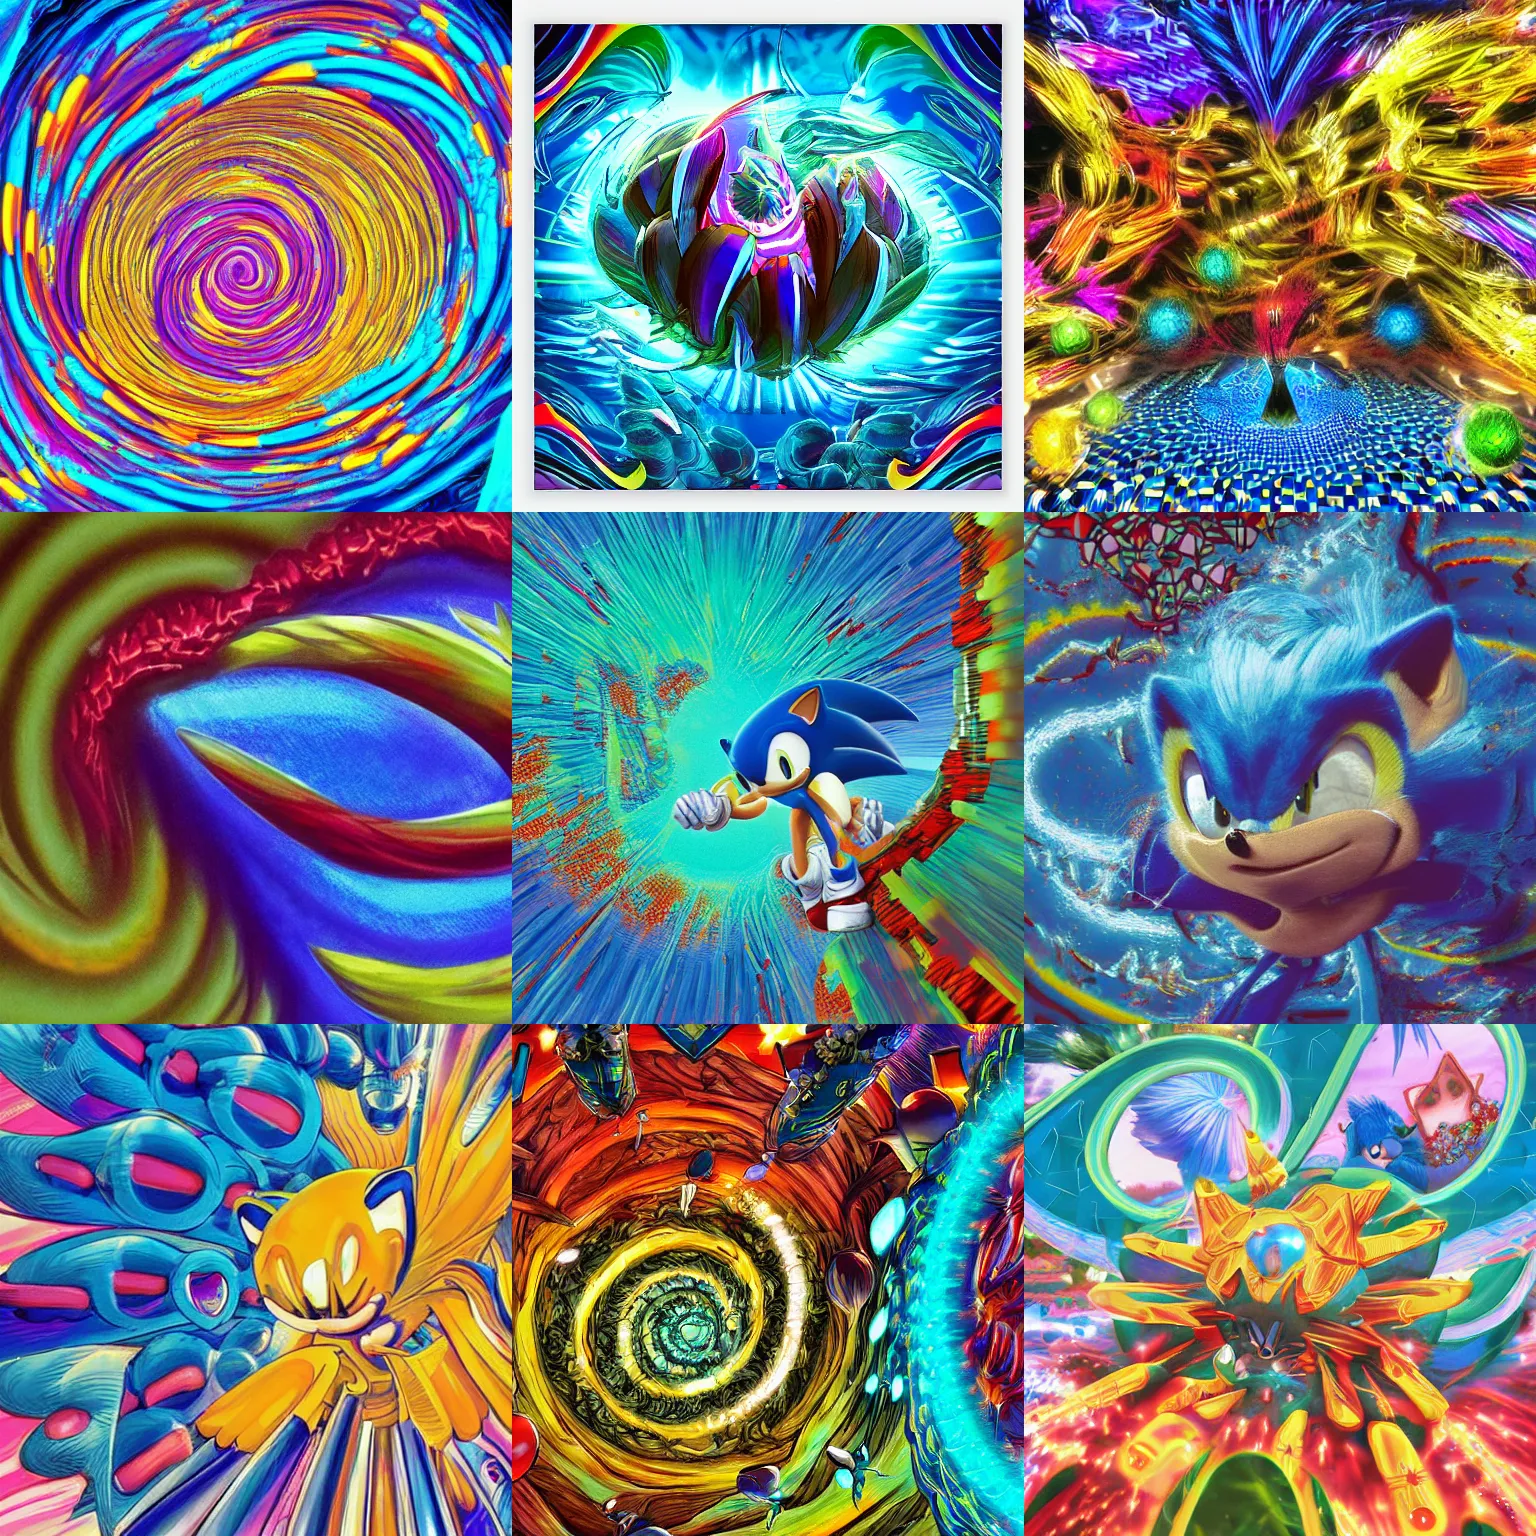 Prompt: close up sonic the hedgehog in a surreal, soft, neon, spiraling fractals, professional, high quality airbrush art mgmt shpongle album cover of a chrome dissolving LSD DMT blue sonic the hedgehog surfing through vaporwave caves, checkerboard horizon , 1990s 1992 Sega Genesis video game album cover